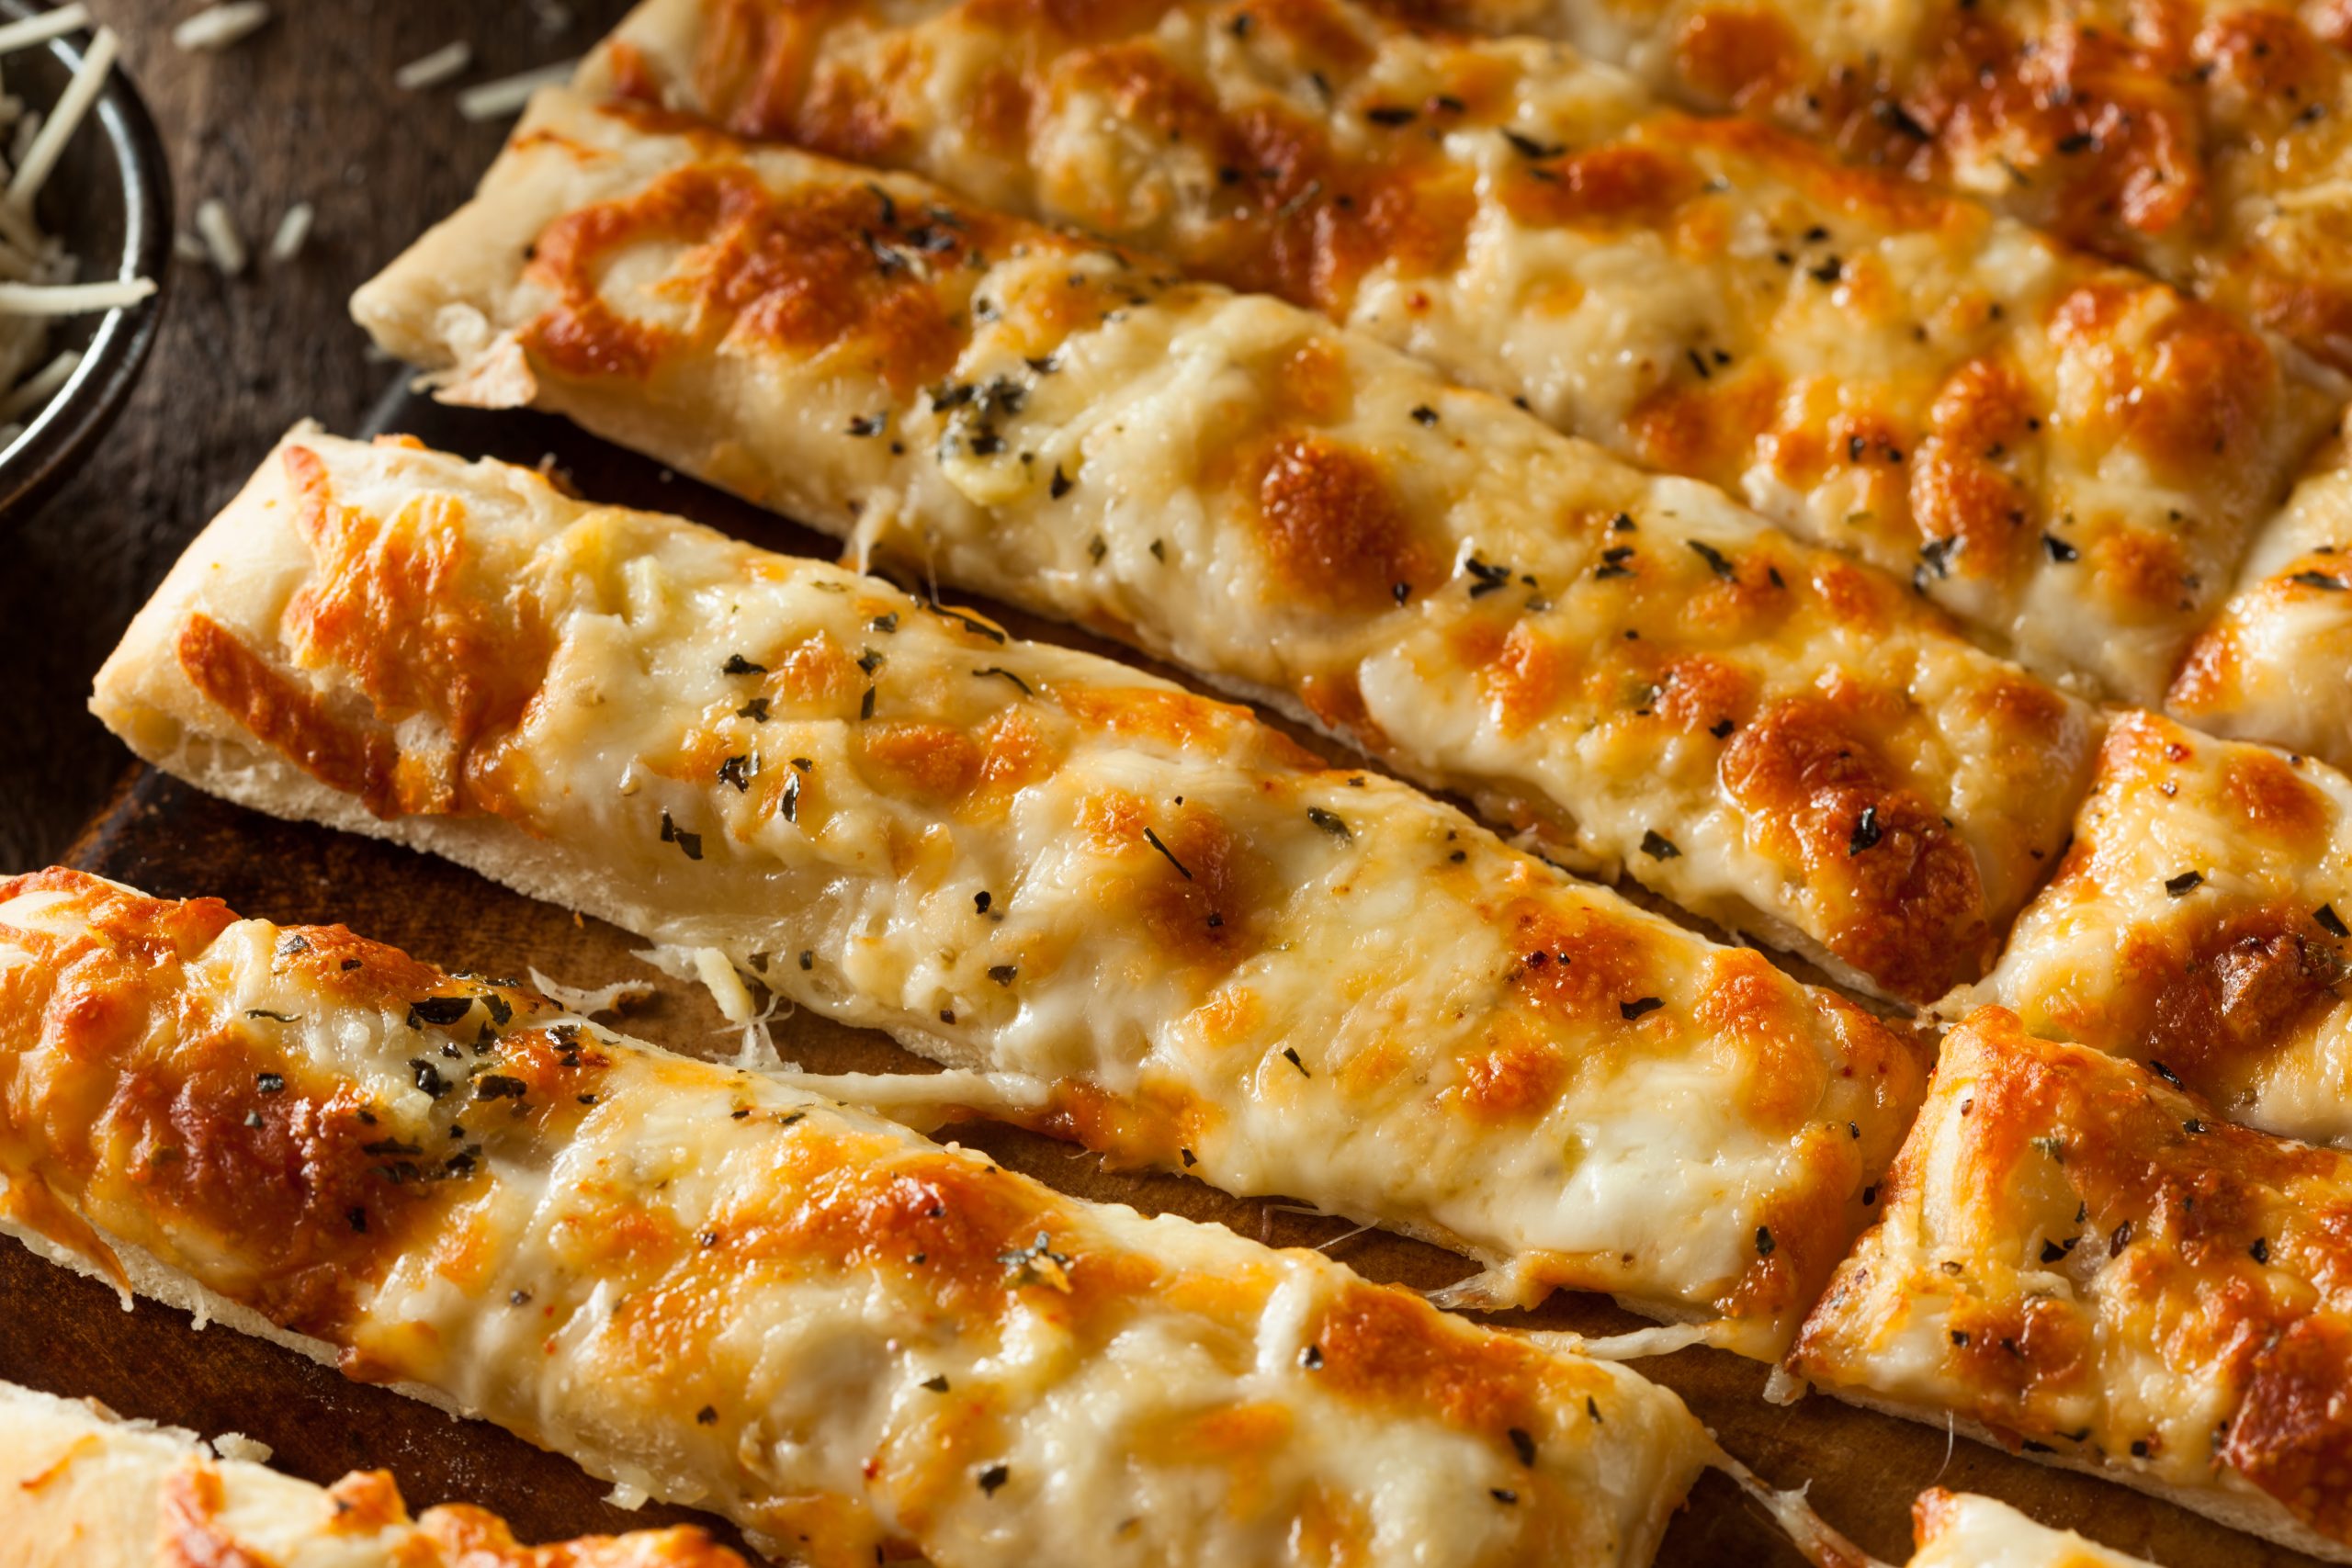 Pizza dough with garlic butter and melted cheese, cut in strips.